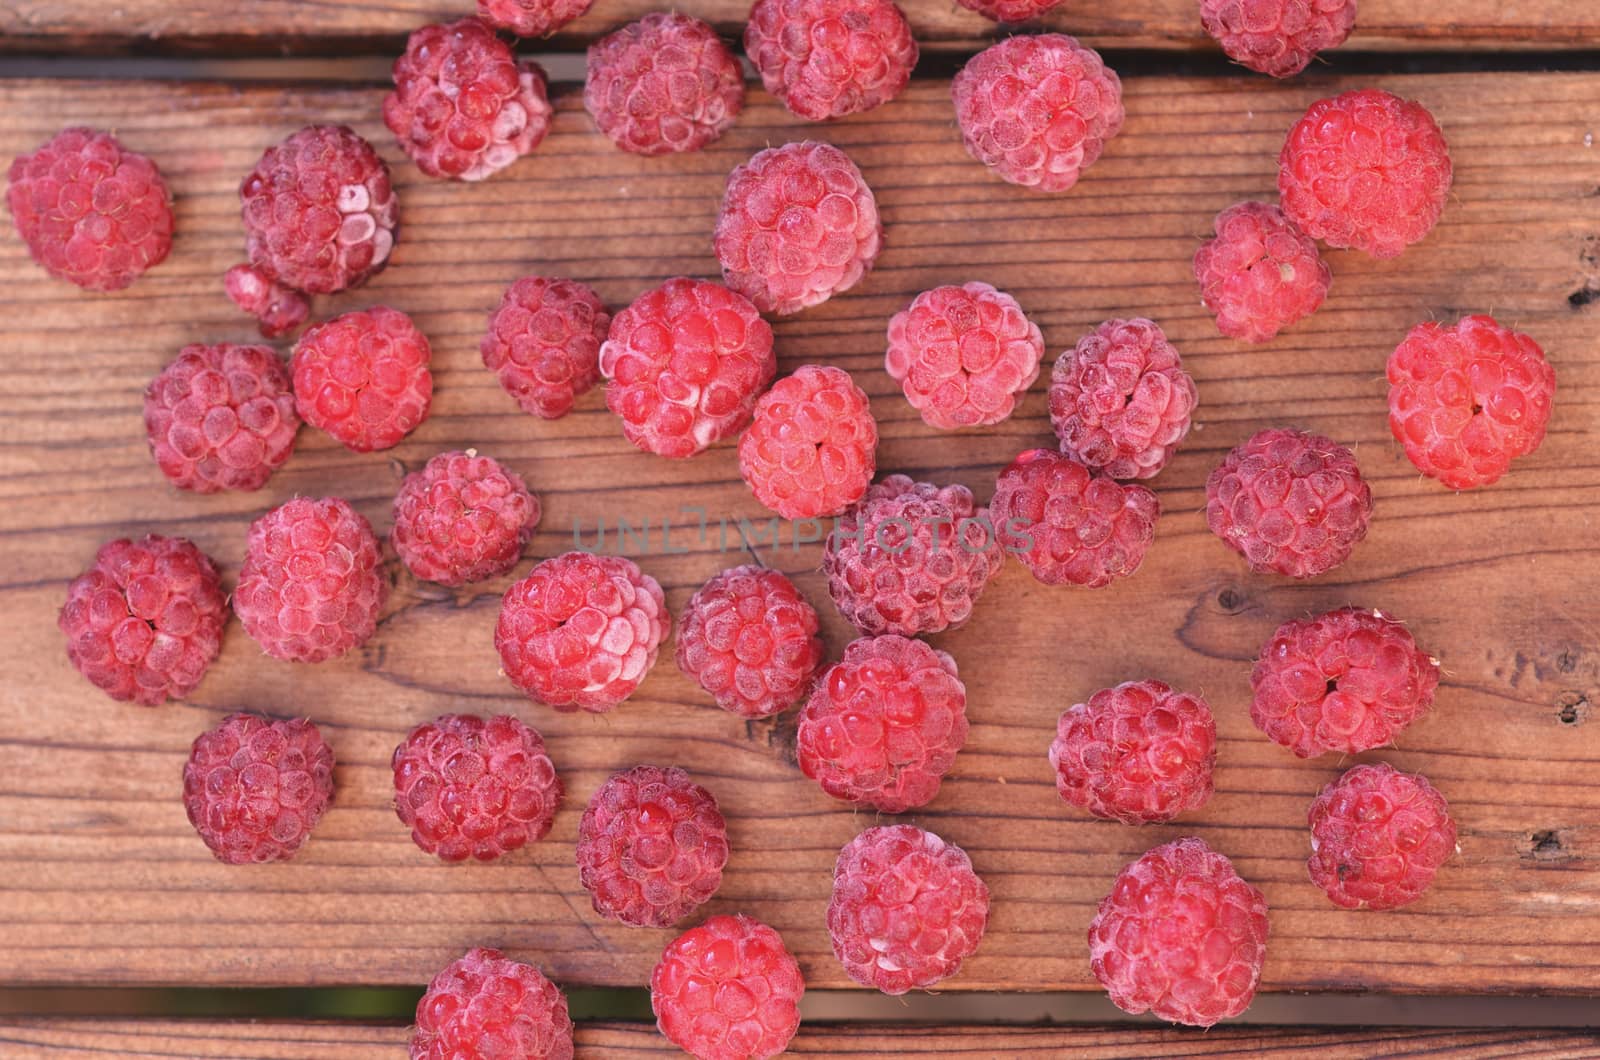 On a wooden background, raspberries are scattered, a photo from above